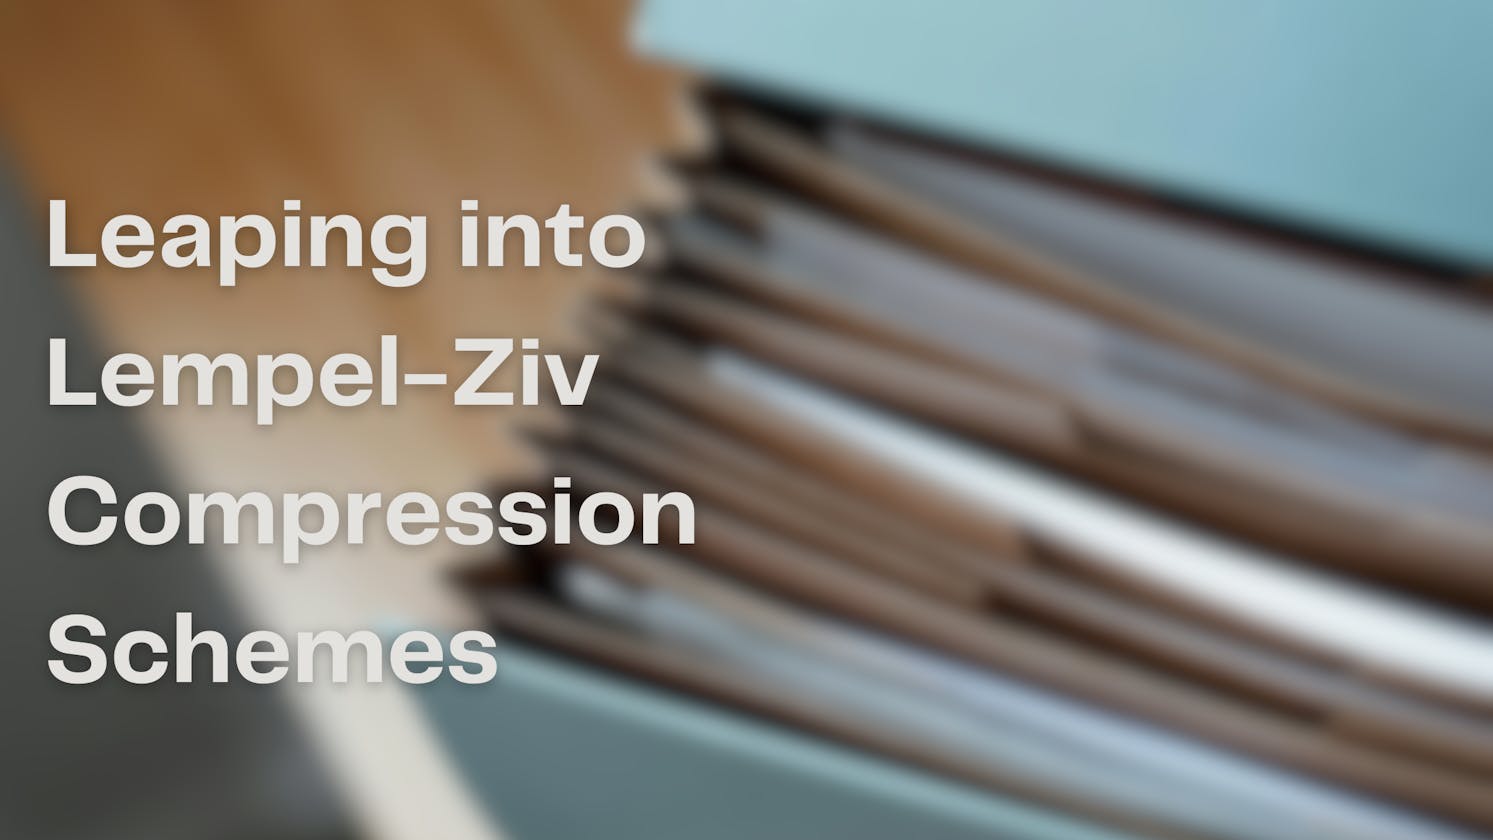 Leaping into Lempel-Ziv Compression Schemes